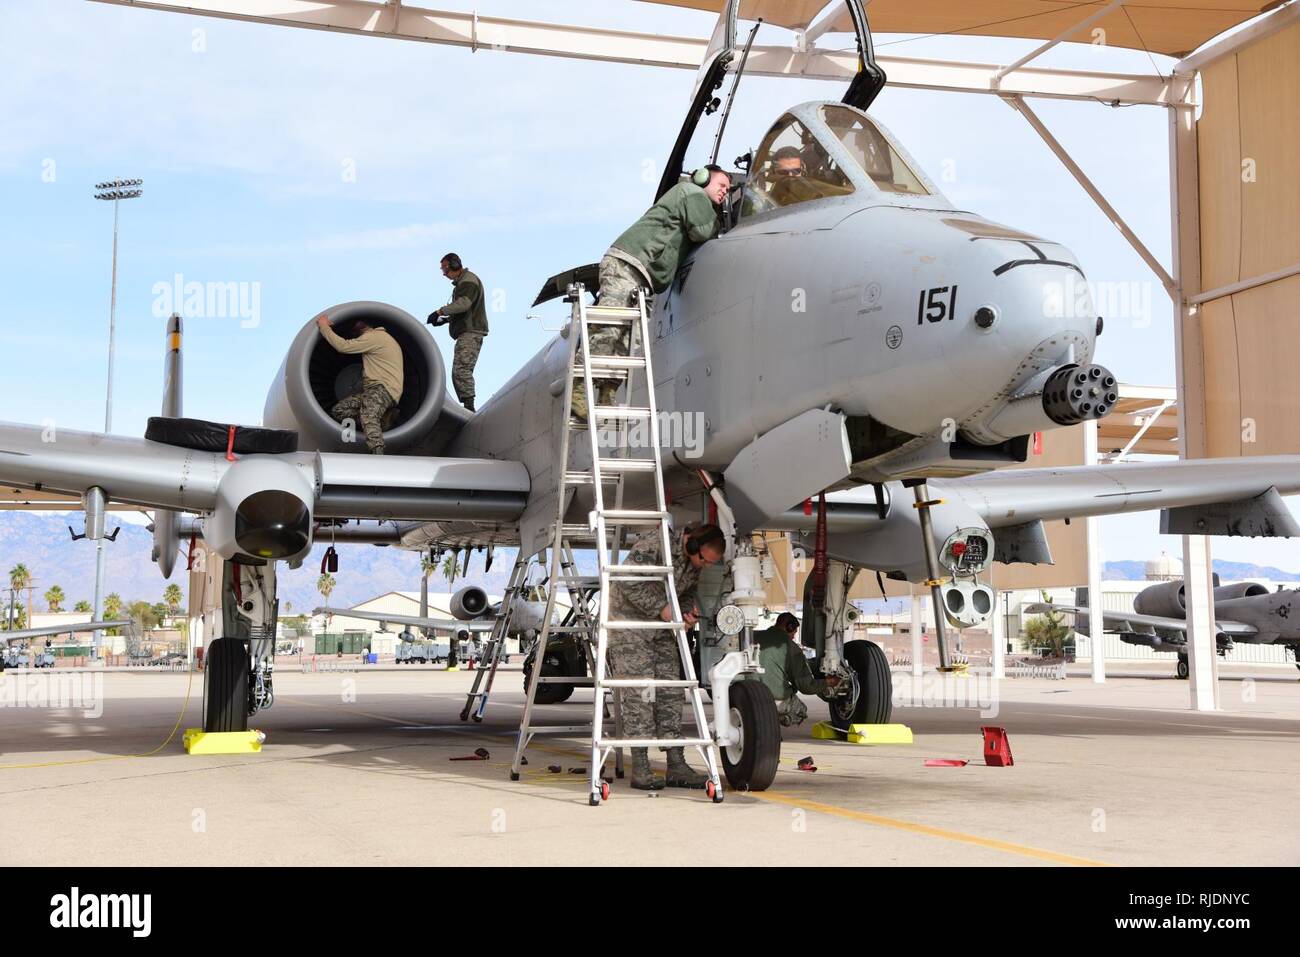 The A-10C Thunderbolt II Demonstration Team conducts a post-flight inspection at Davis-Monthan Air Force Base, Ariz., Jan. 22, 2018. The A-10 Demo Team and A-10 Heritage Flight pilots are scheduled to support a Heritage Flight flyover during the opening ceremonies of Super Bowl LII in Minneapolis, Minnesota. Stock Photo